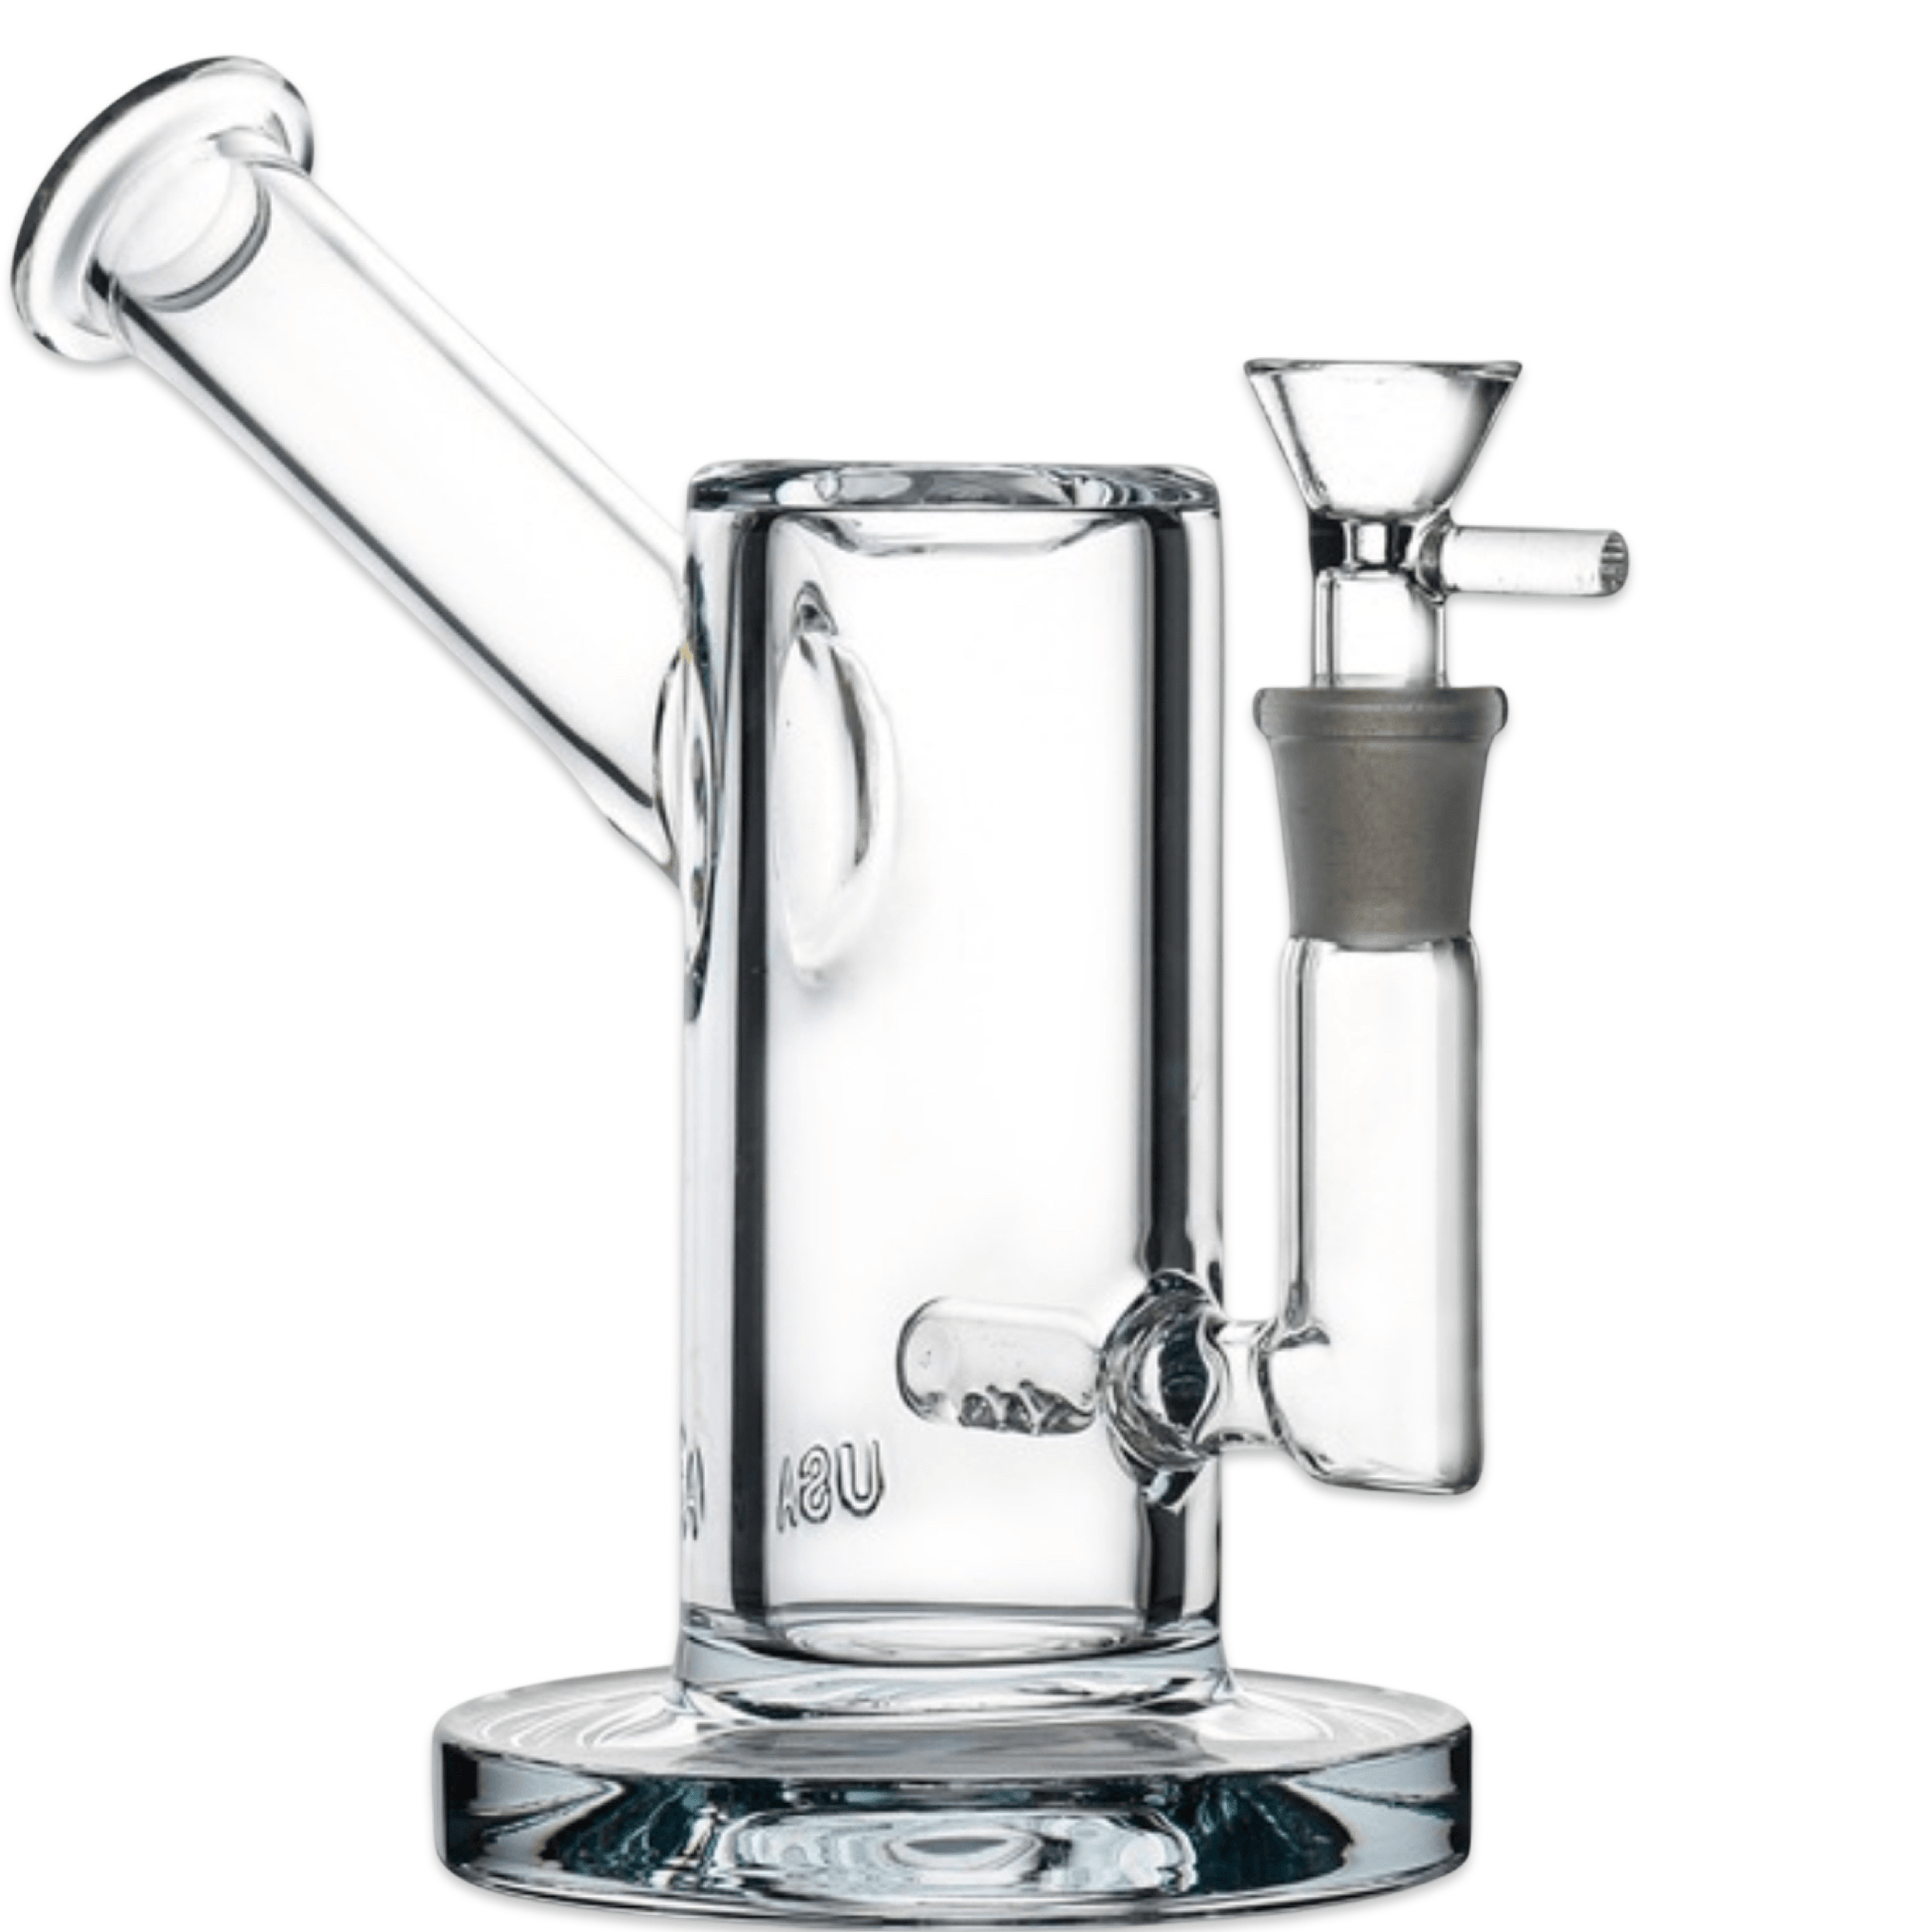 7” Infused Inline Perc Bong - Weed Subscription Box